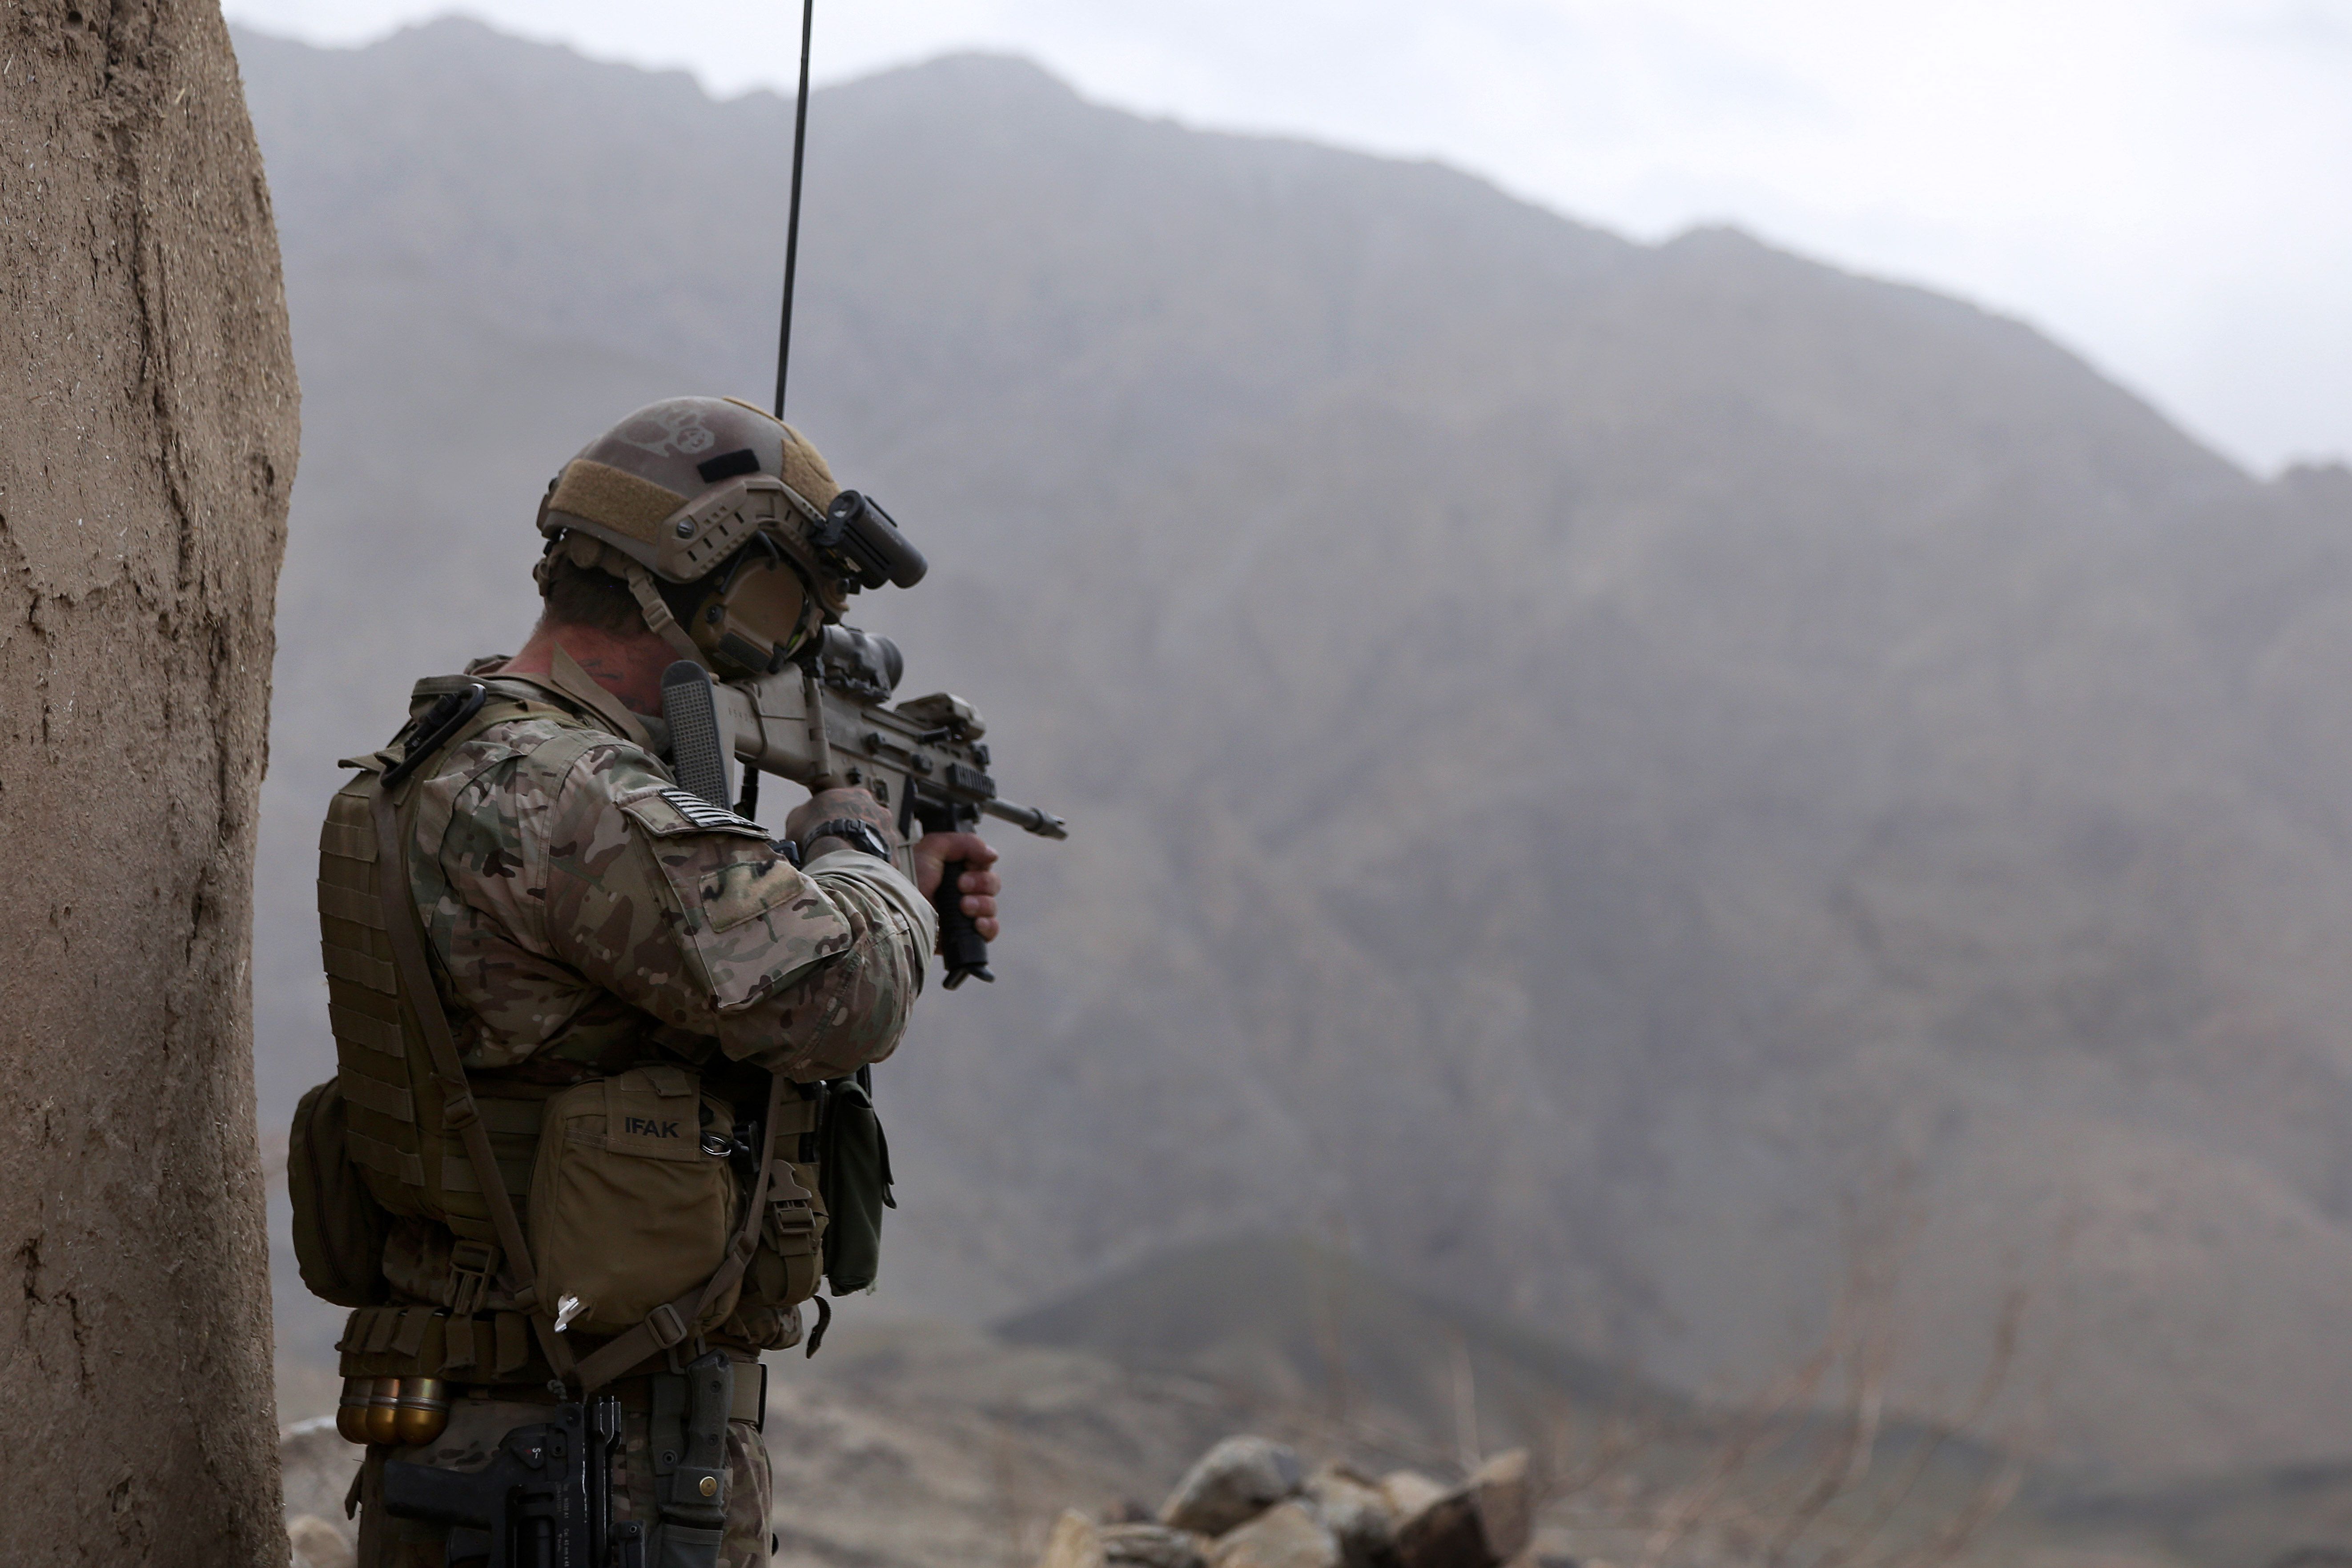 A U.S. Special Forces soldier provides security during a clearance